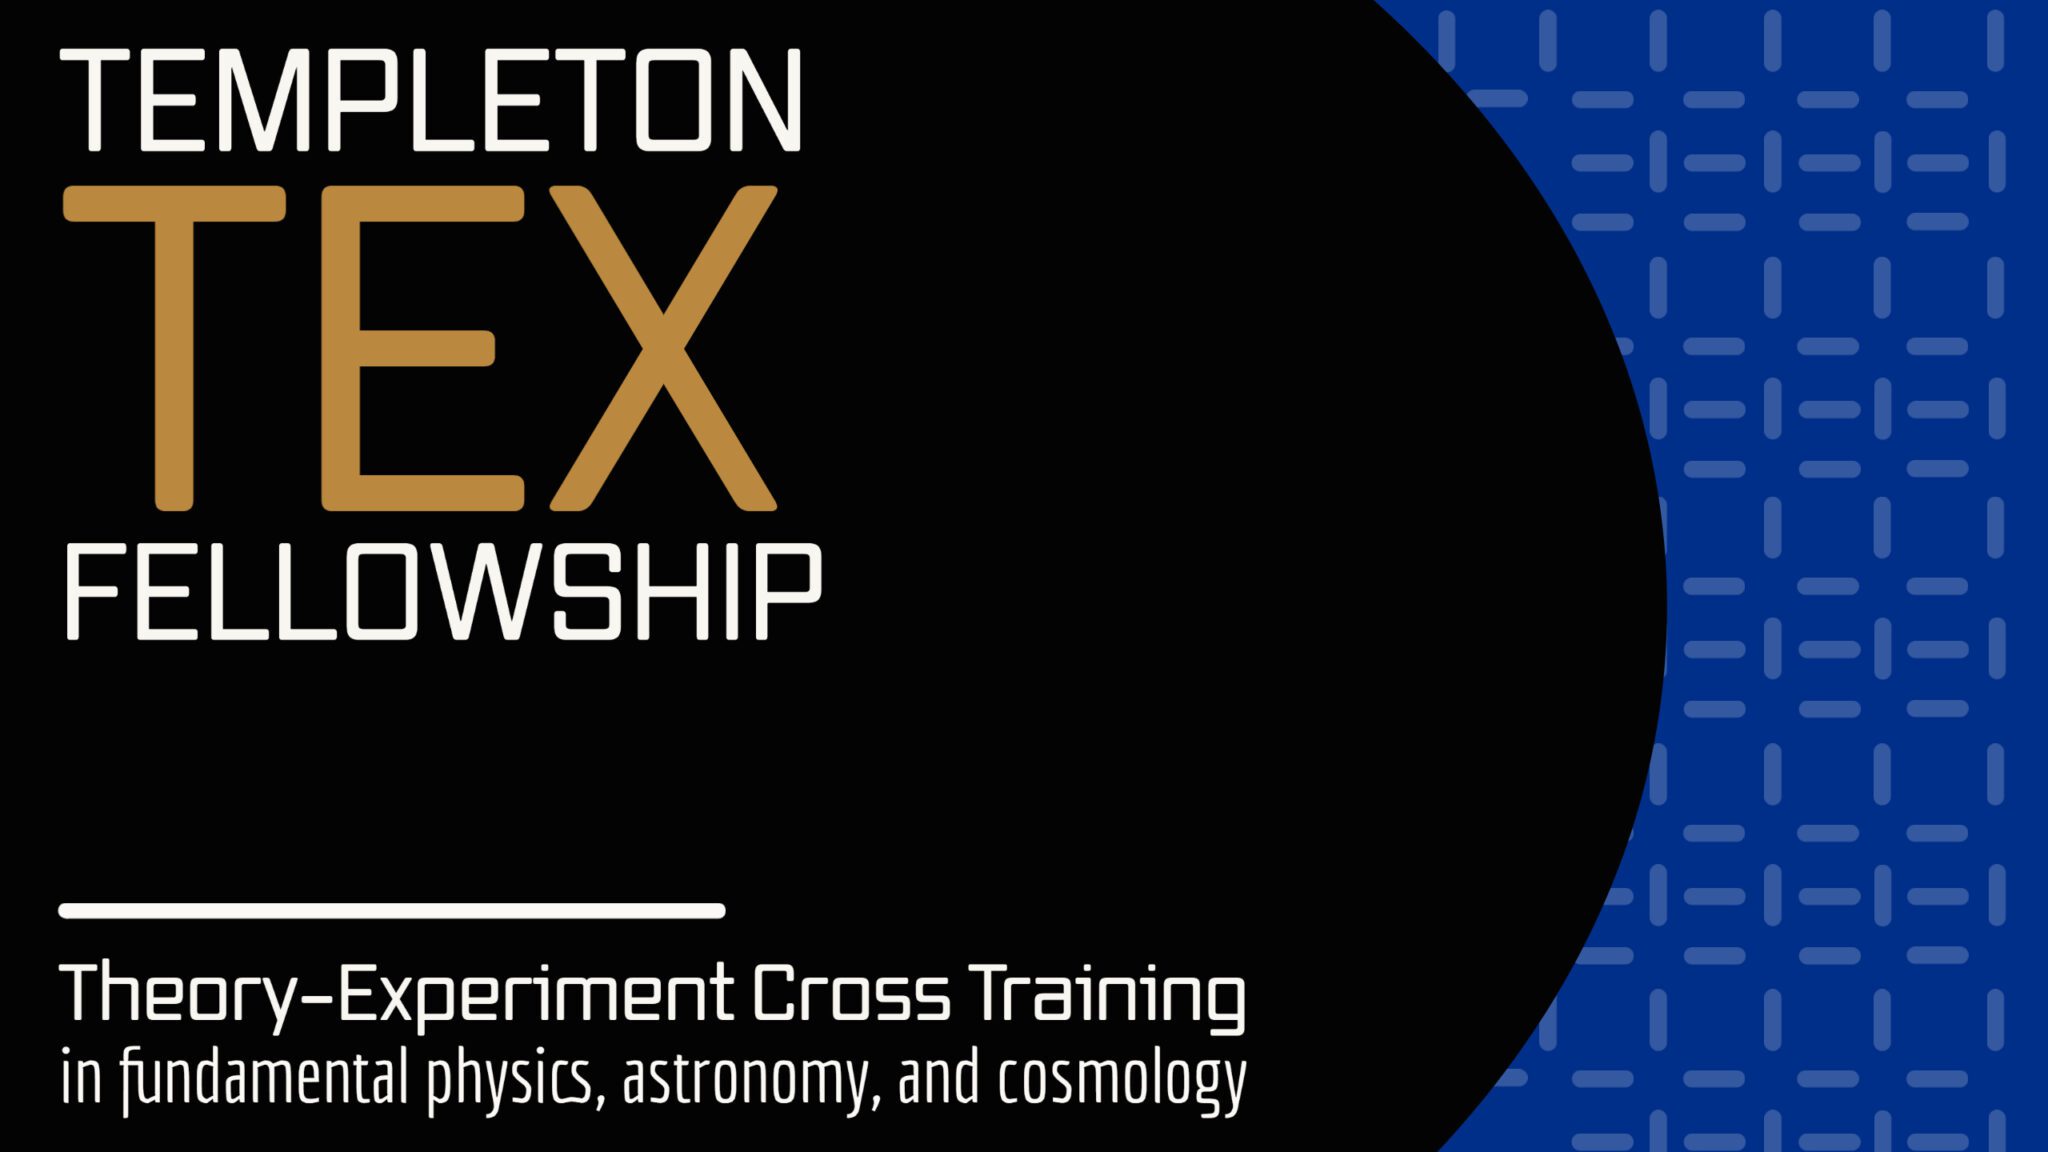 Announcing the Templeton TEX Fellowship Funding Competition